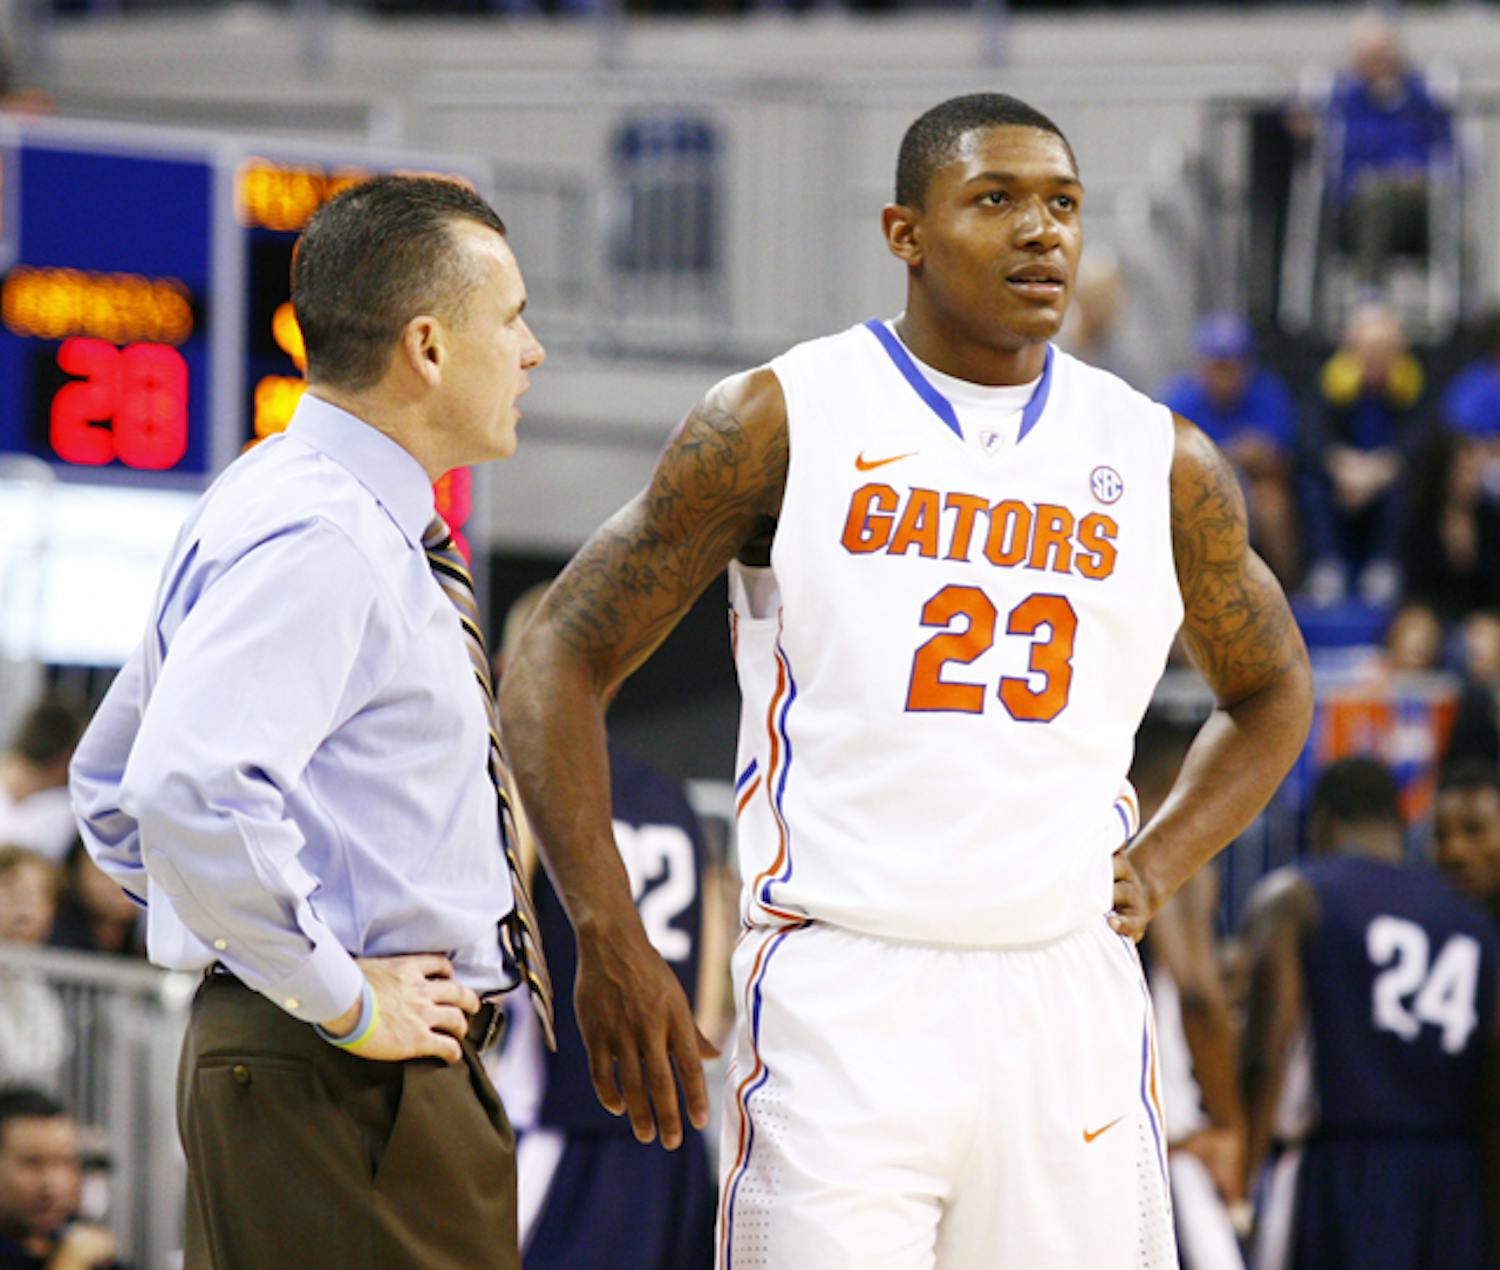 UF coach Billy Donovan (left) said working with freshmen like Brad Beal (right) has been a rewarding part of the job and something that keeps him motivated after 18 years.